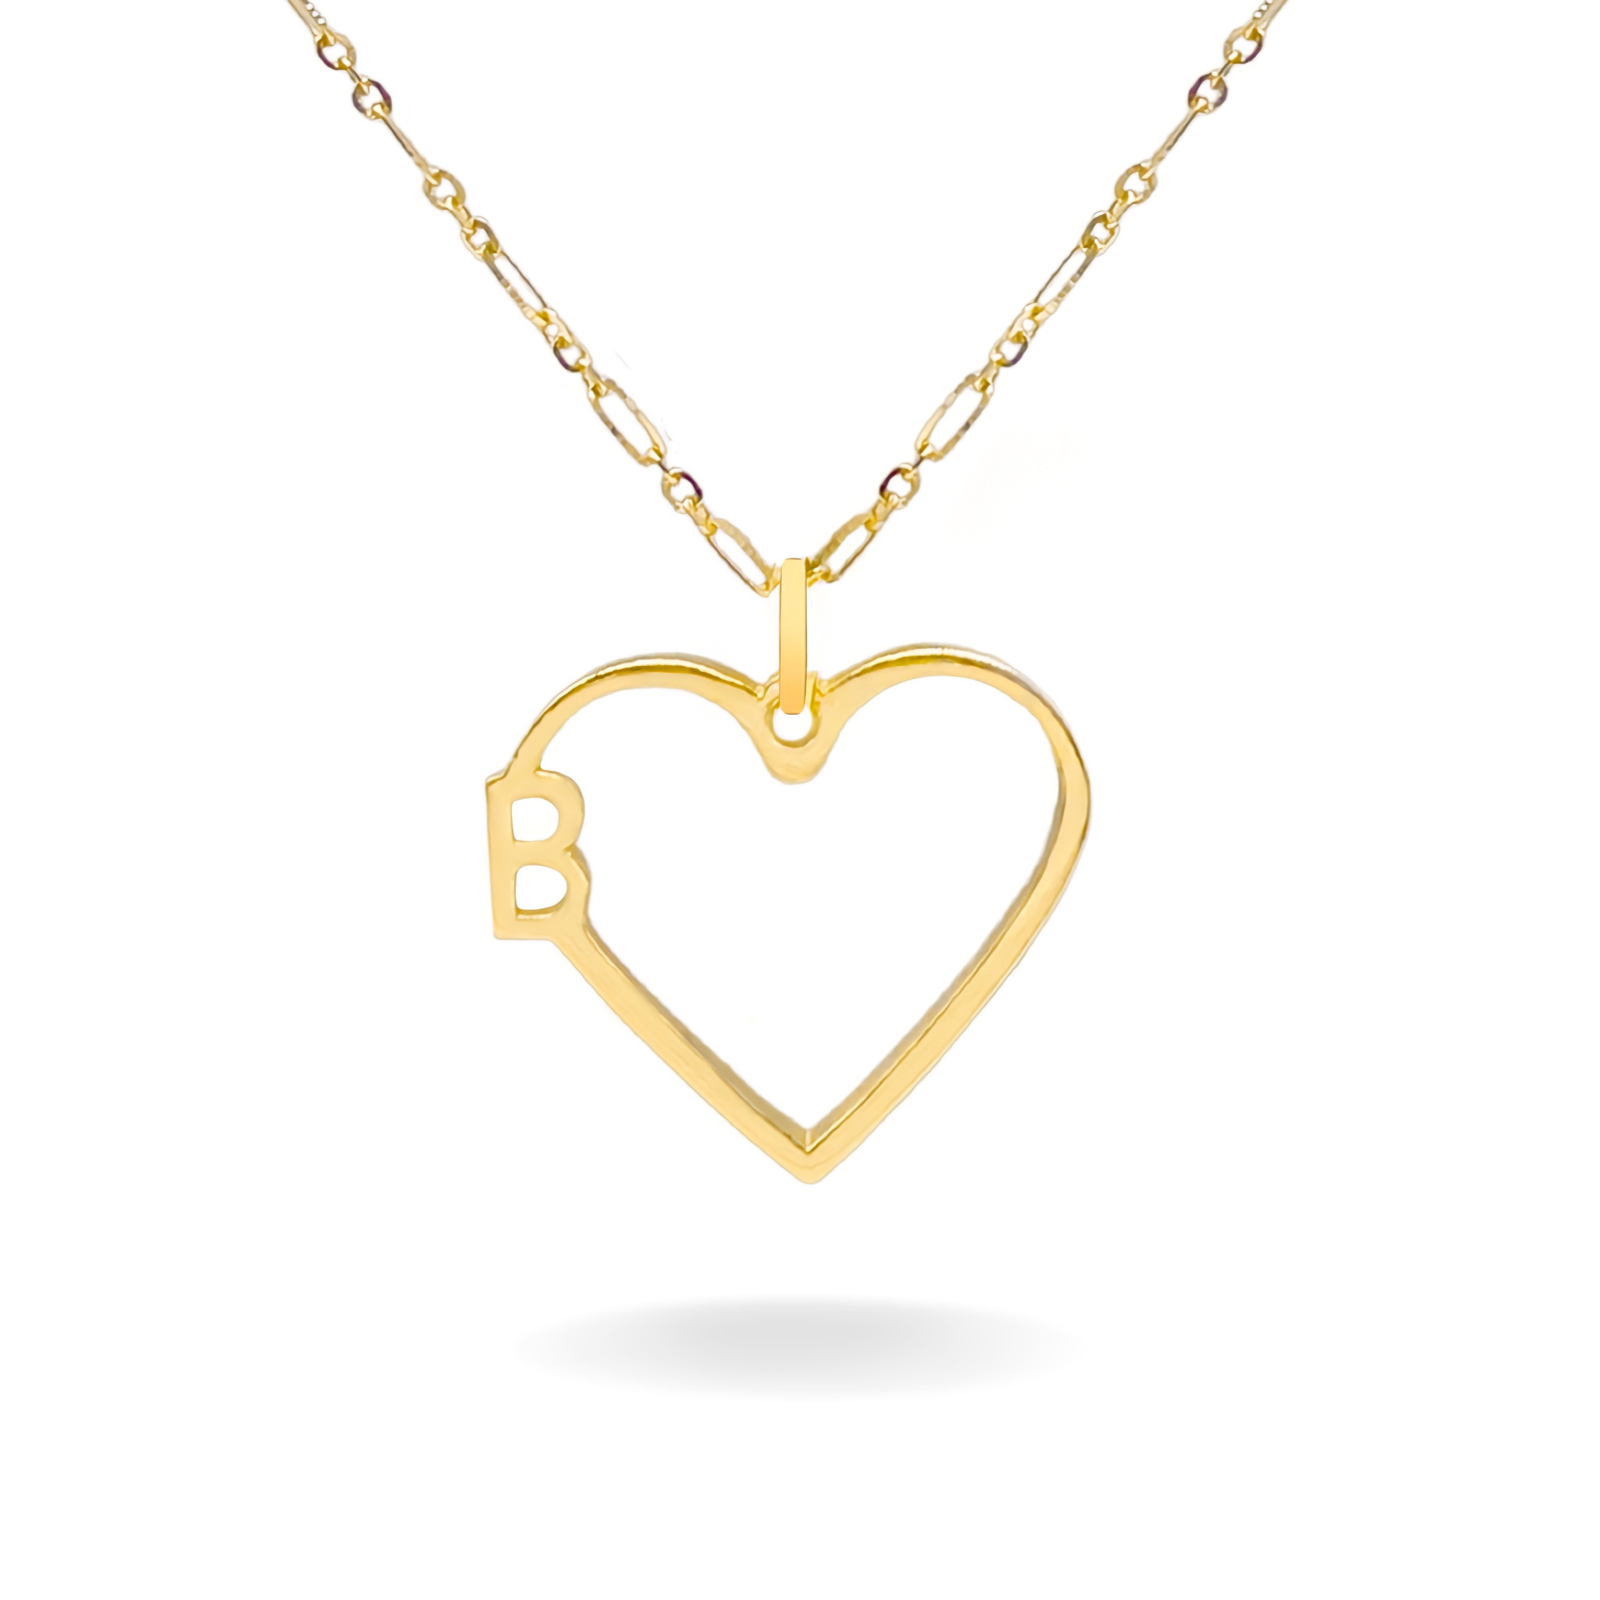 14K YELLOW GOLD SERIF INITIAL HEART PENDANT NECKLACE